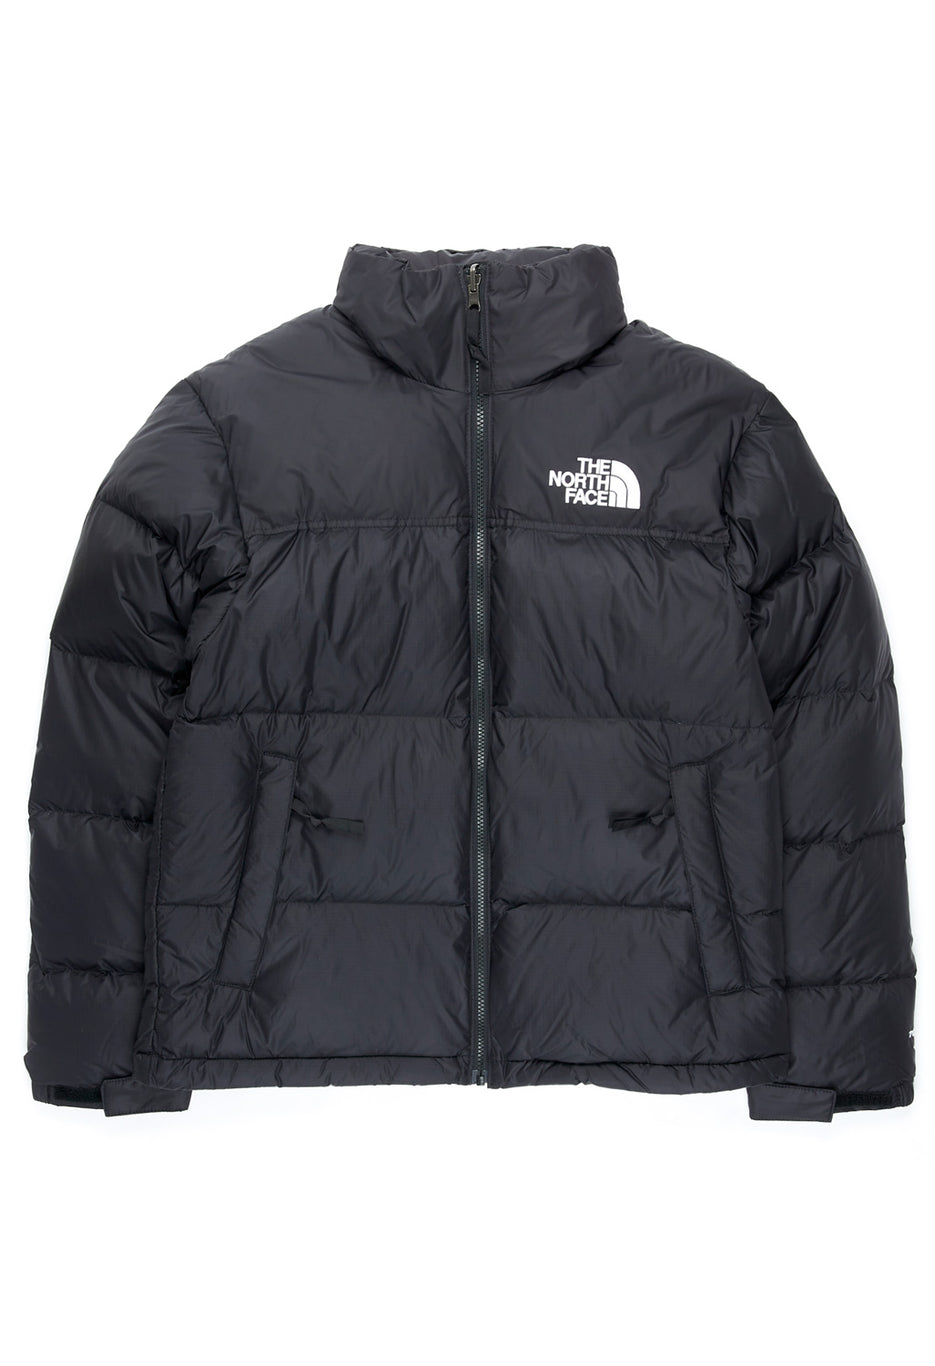 The North Face - Outsiders Store – Outsiders Store UK